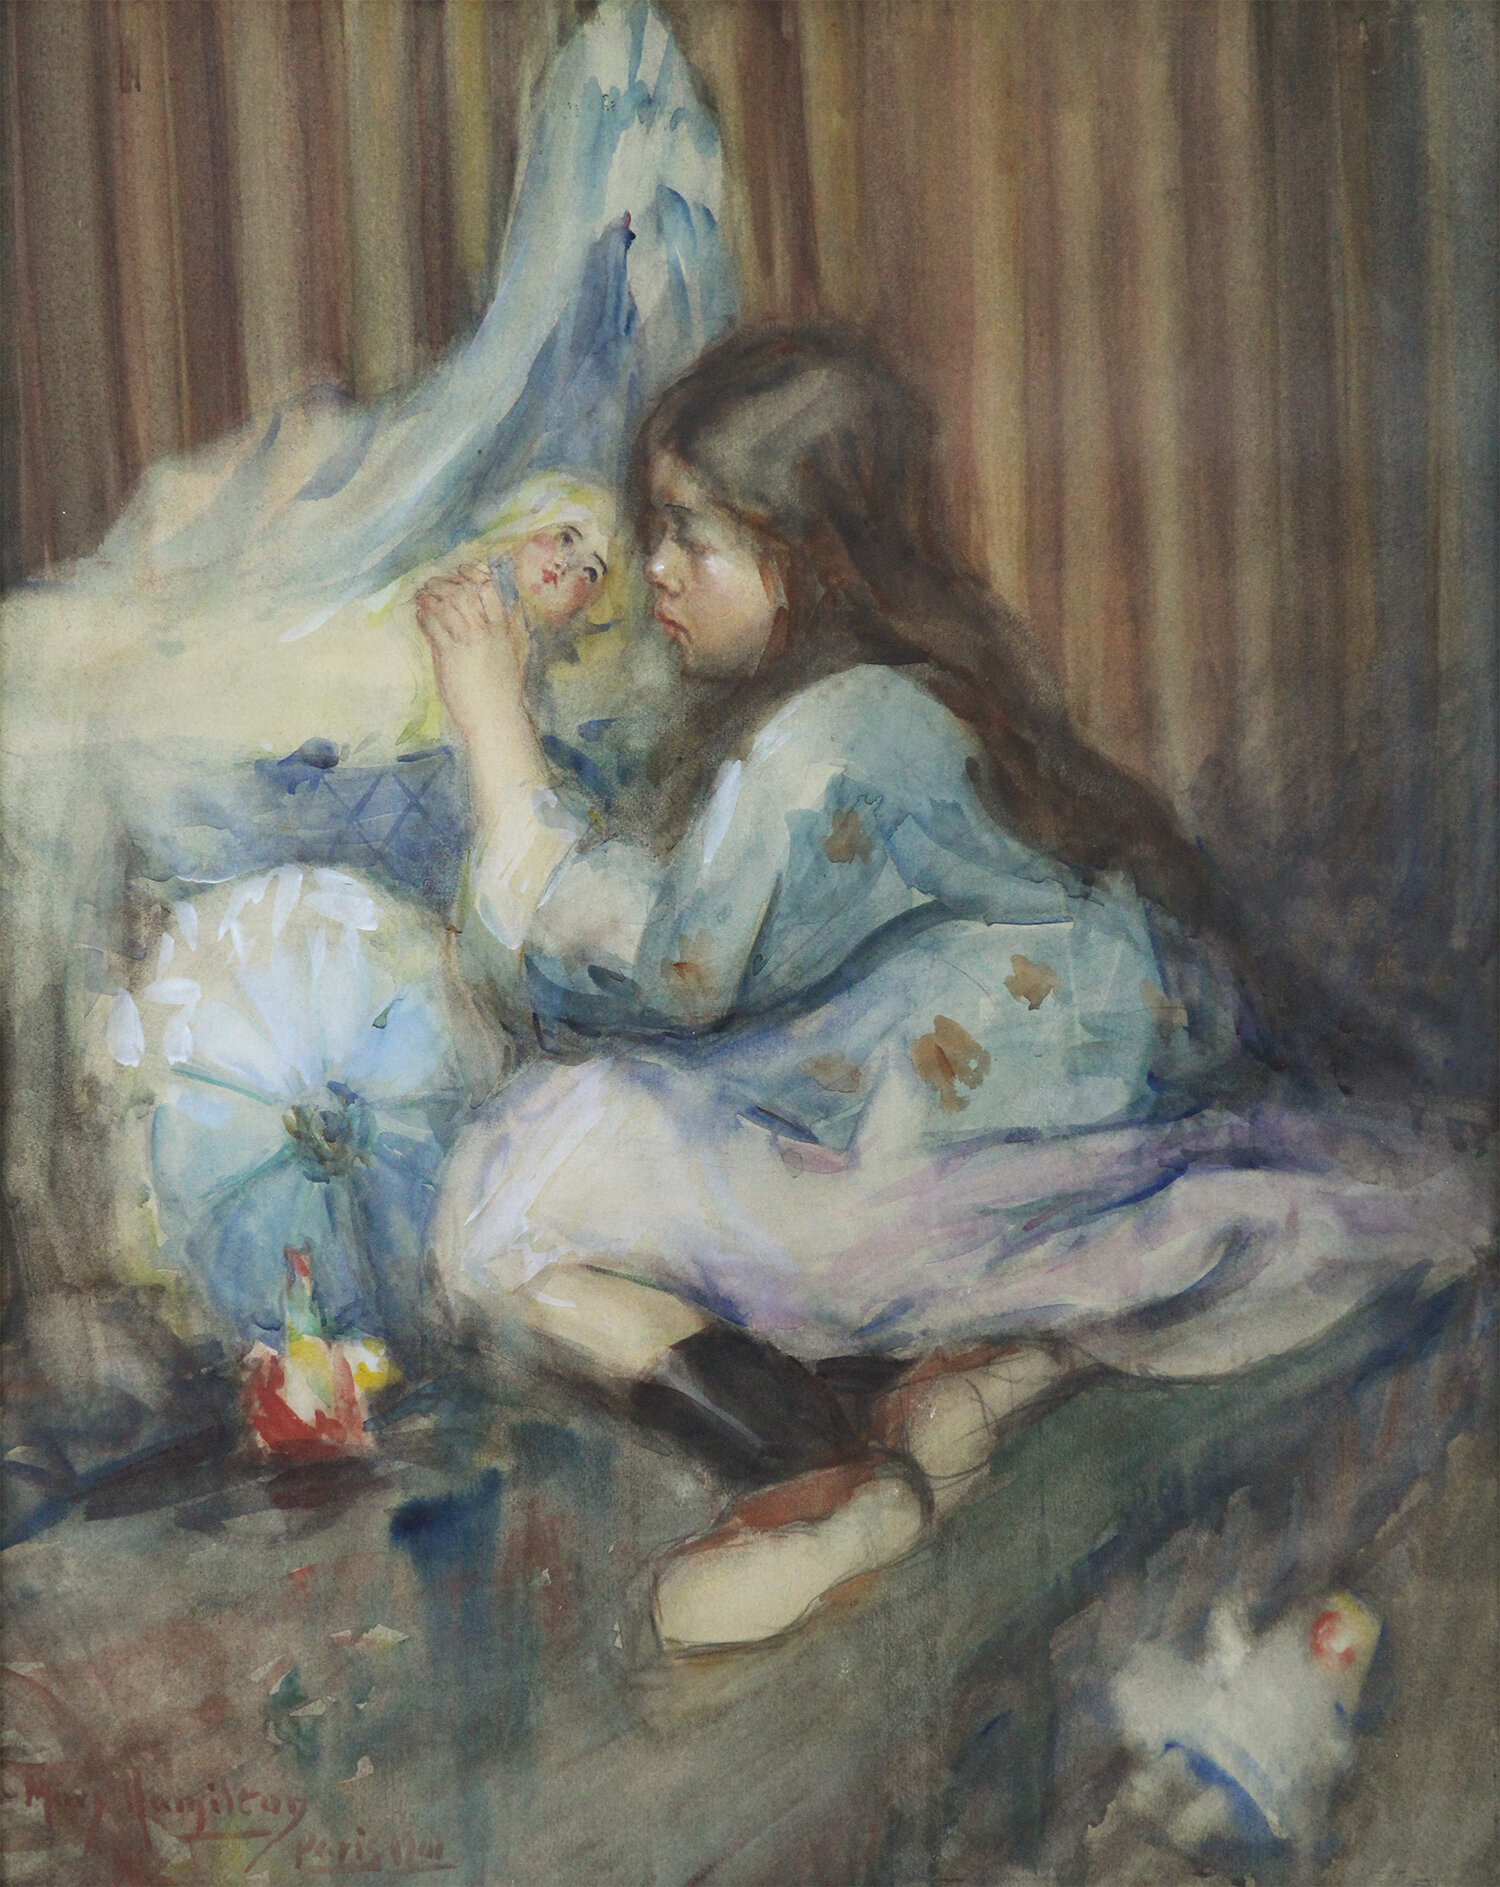 Mary Riter Hamilton (Canadian 1873-1954) 'Young Girl in Blue Dress, Paris 1911'